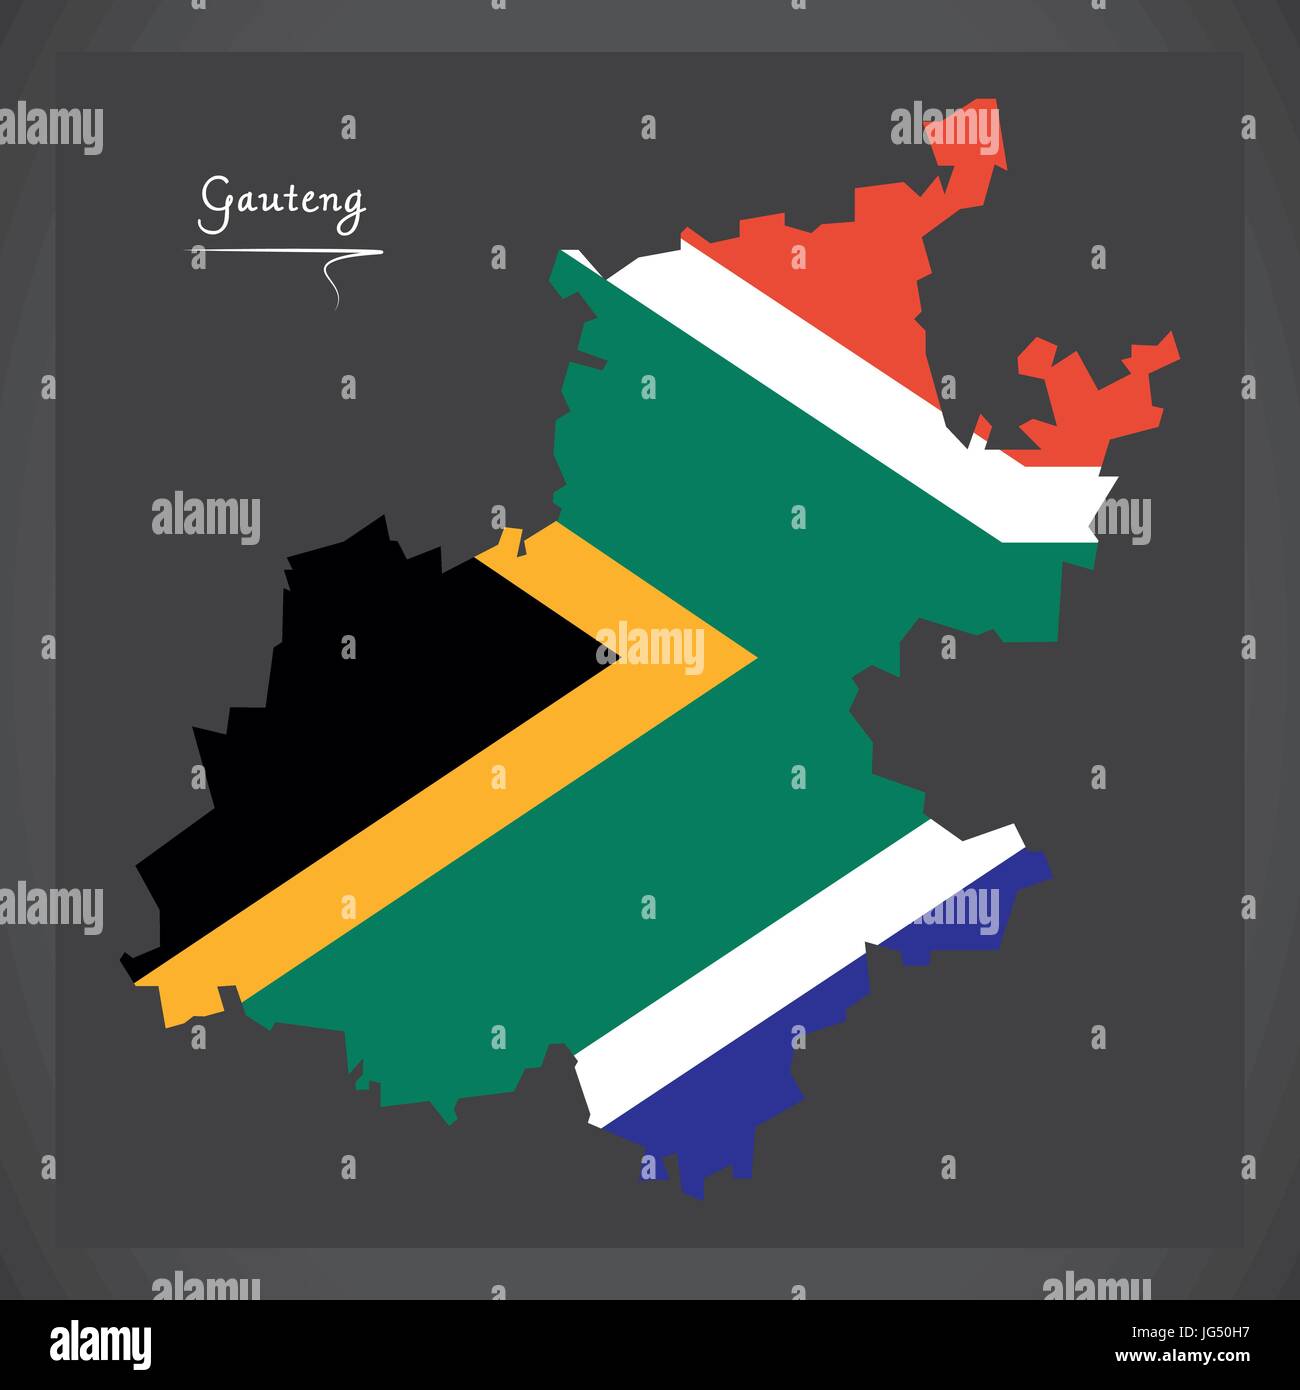 Gauteng South Africa map with national flag illustration Stock Vector